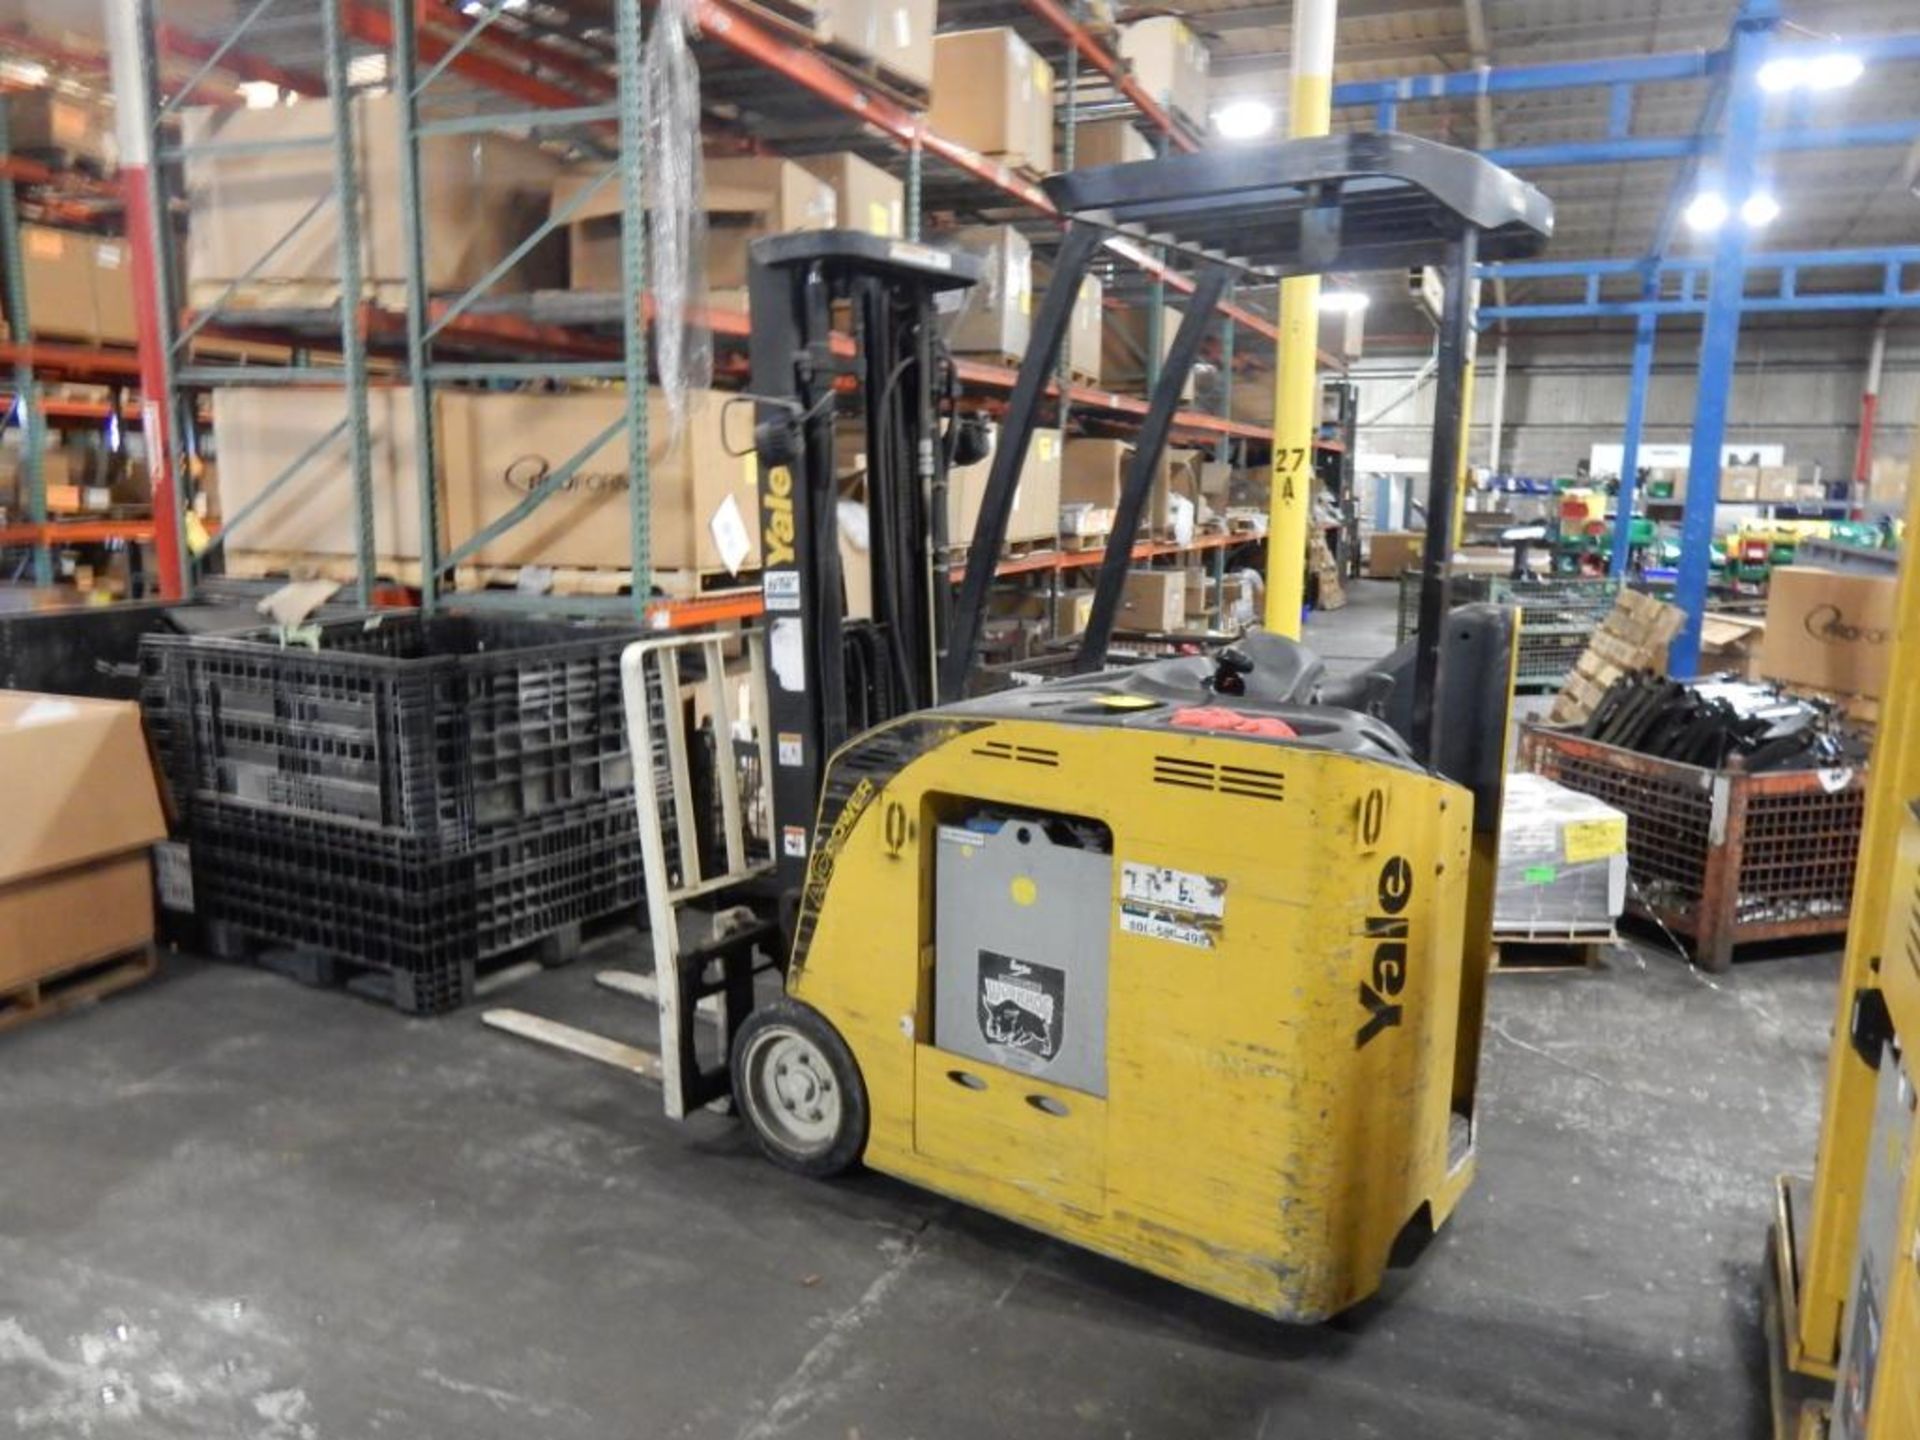 YALE ELEC. STAND-UP RIDER FORKLIFT, M# ESC035ACN36TE088, S/N B883N02807L, 3,500 LB. CAP., APPROX. 20